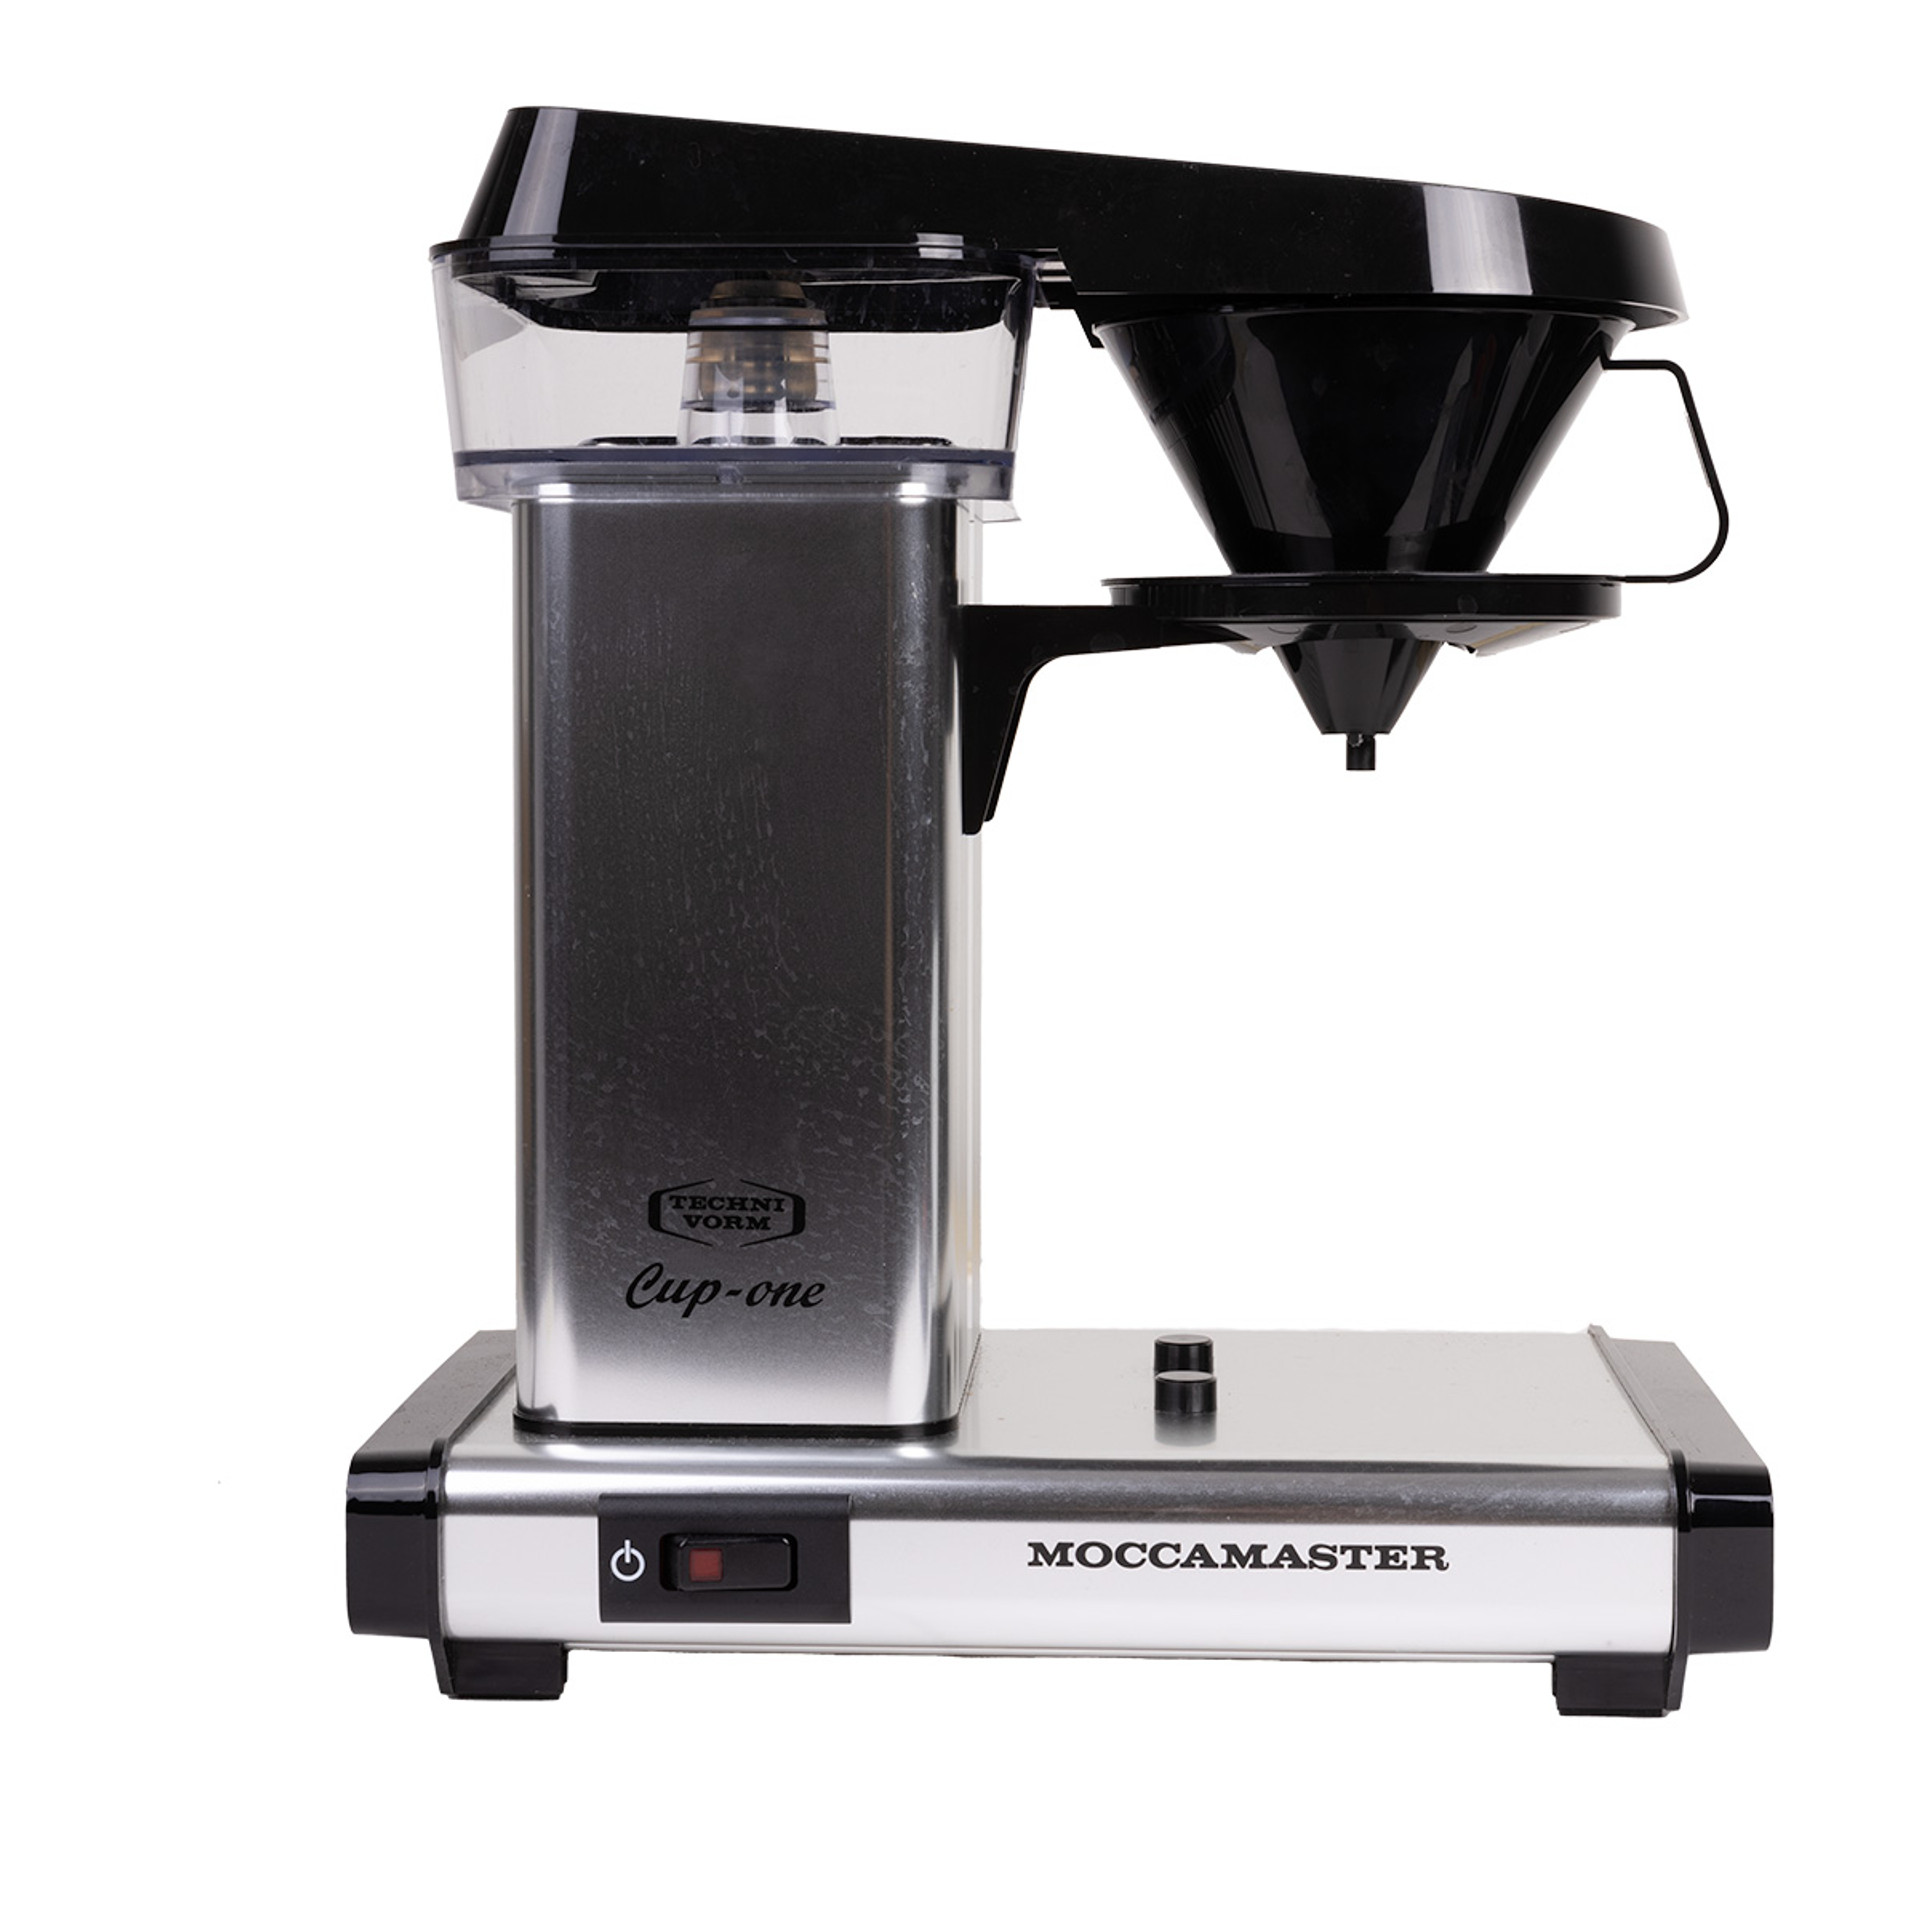 Technivorm Moccamaster Cup-One Automatic Coffee Maker